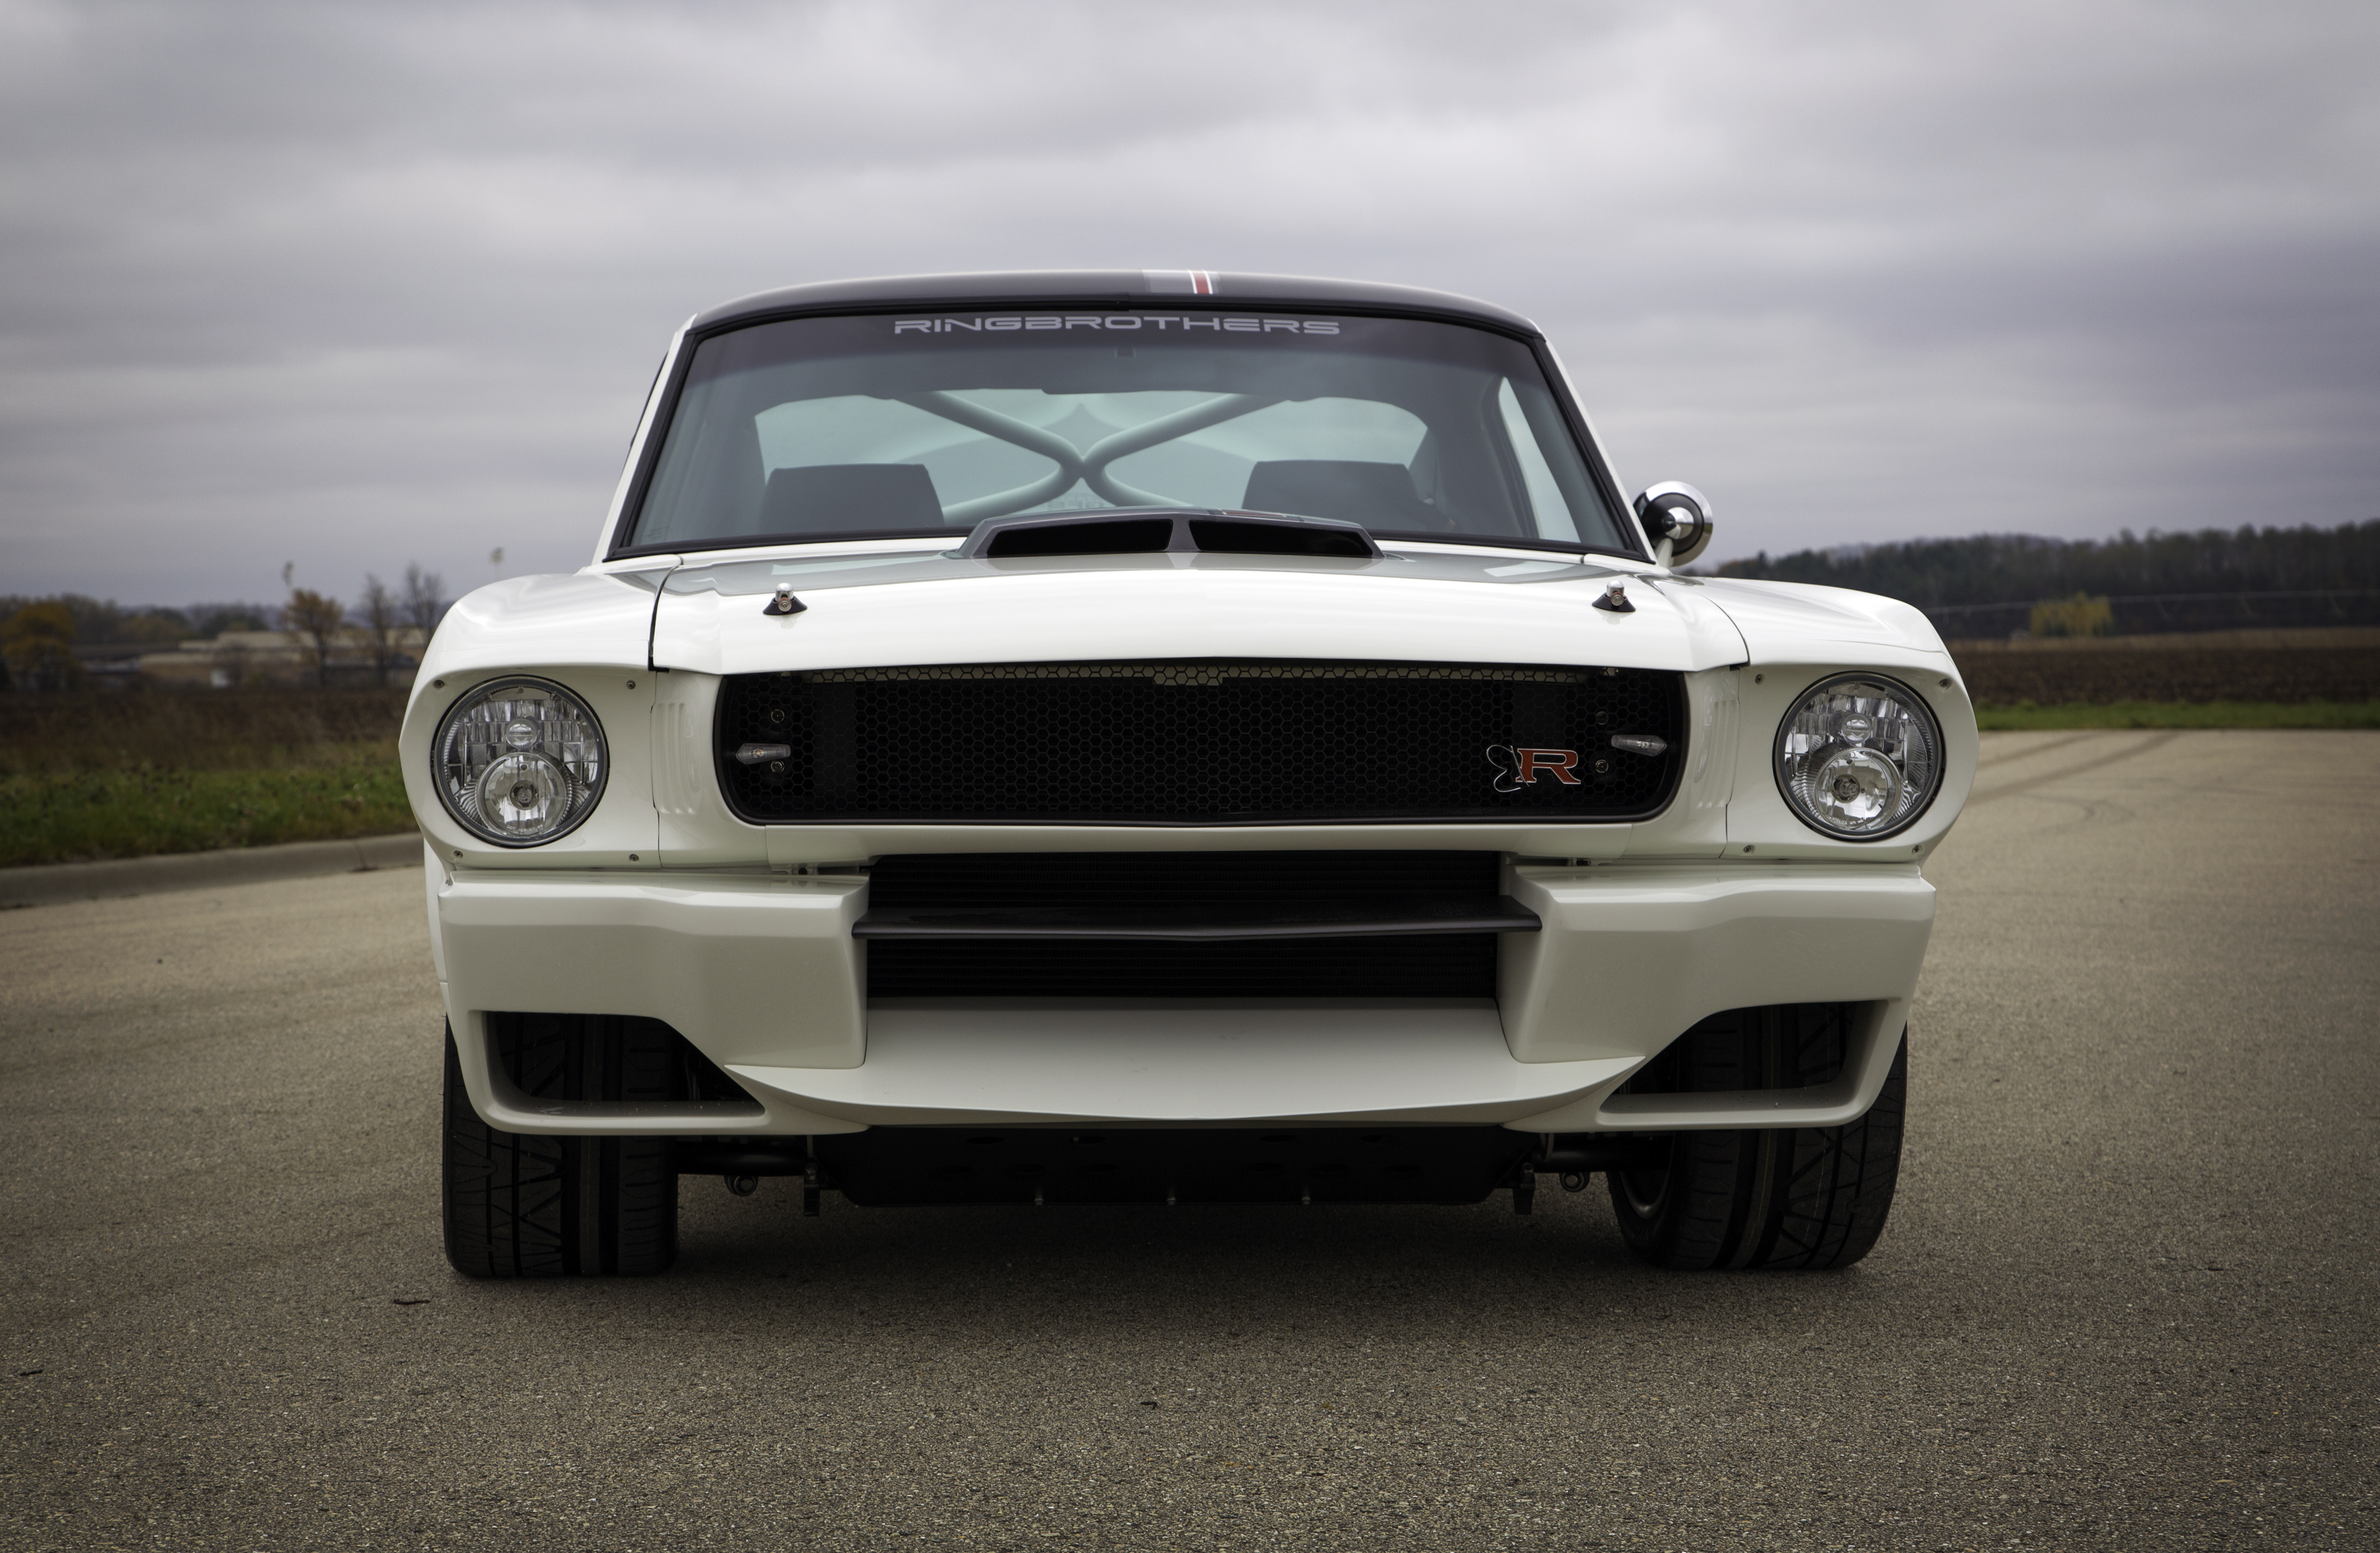 Car Fastback Ford Mustang Blizzard Muscle Car Ringbrothers Tuning White Car 3677x2400